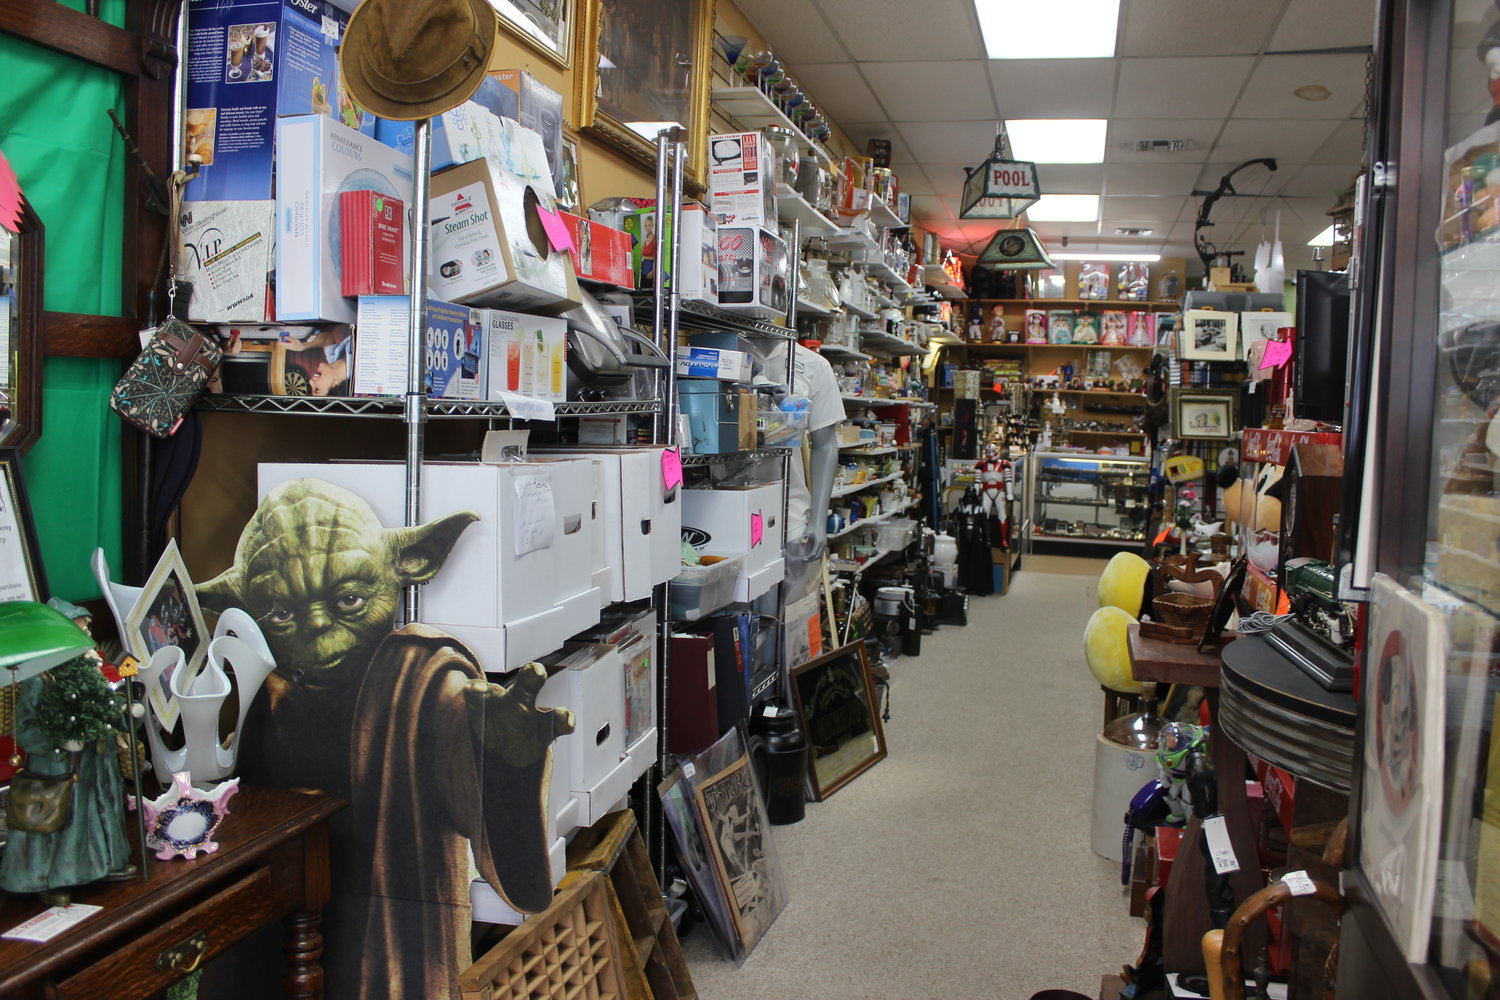 The shop has products ranging from household appliances to staples of pop culture.